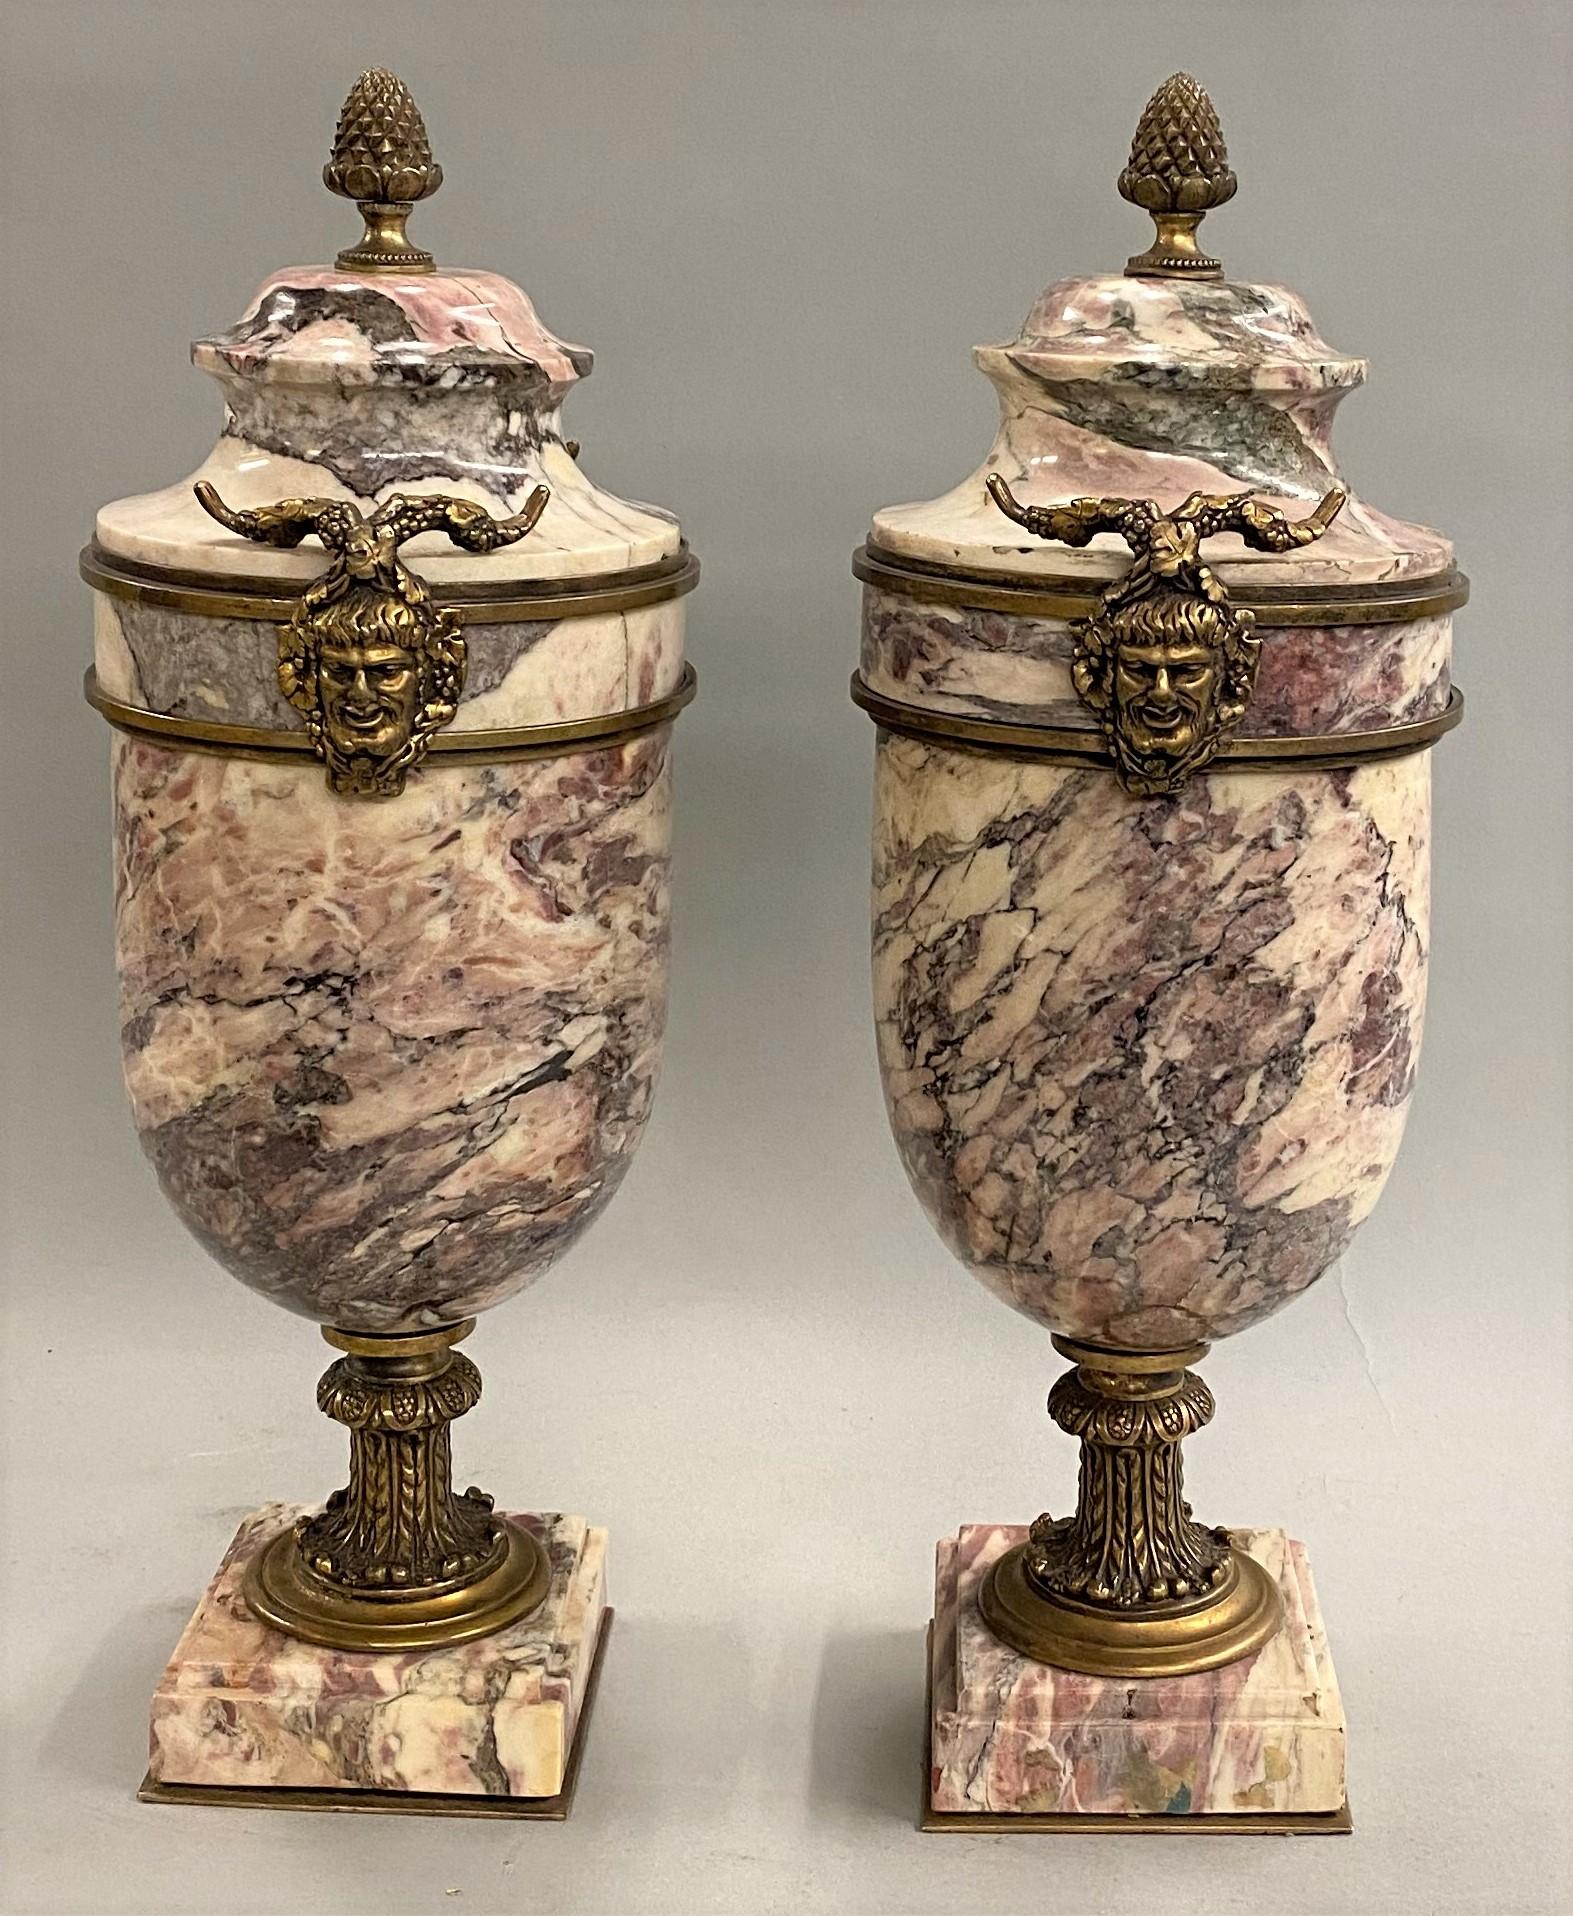 Pair of Italian Neoclassical Style Gilt Bronze Mounted Marble Urns In Good Condition For Sale In Milford, NH